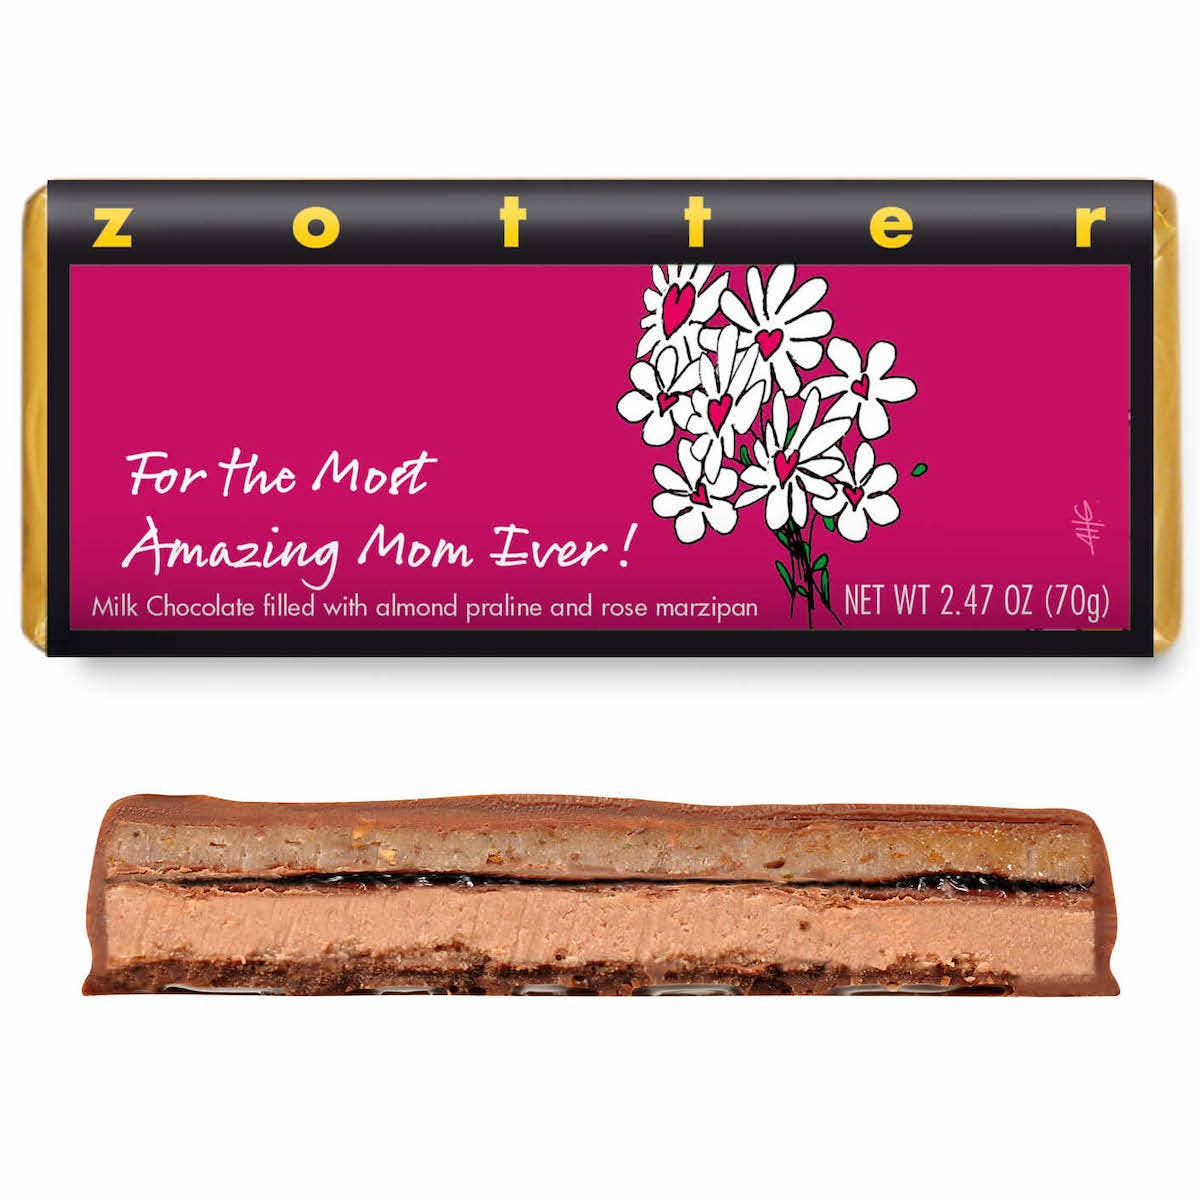 For the Most Amazing Mom Ever! (Hand-scooped Chocolate)